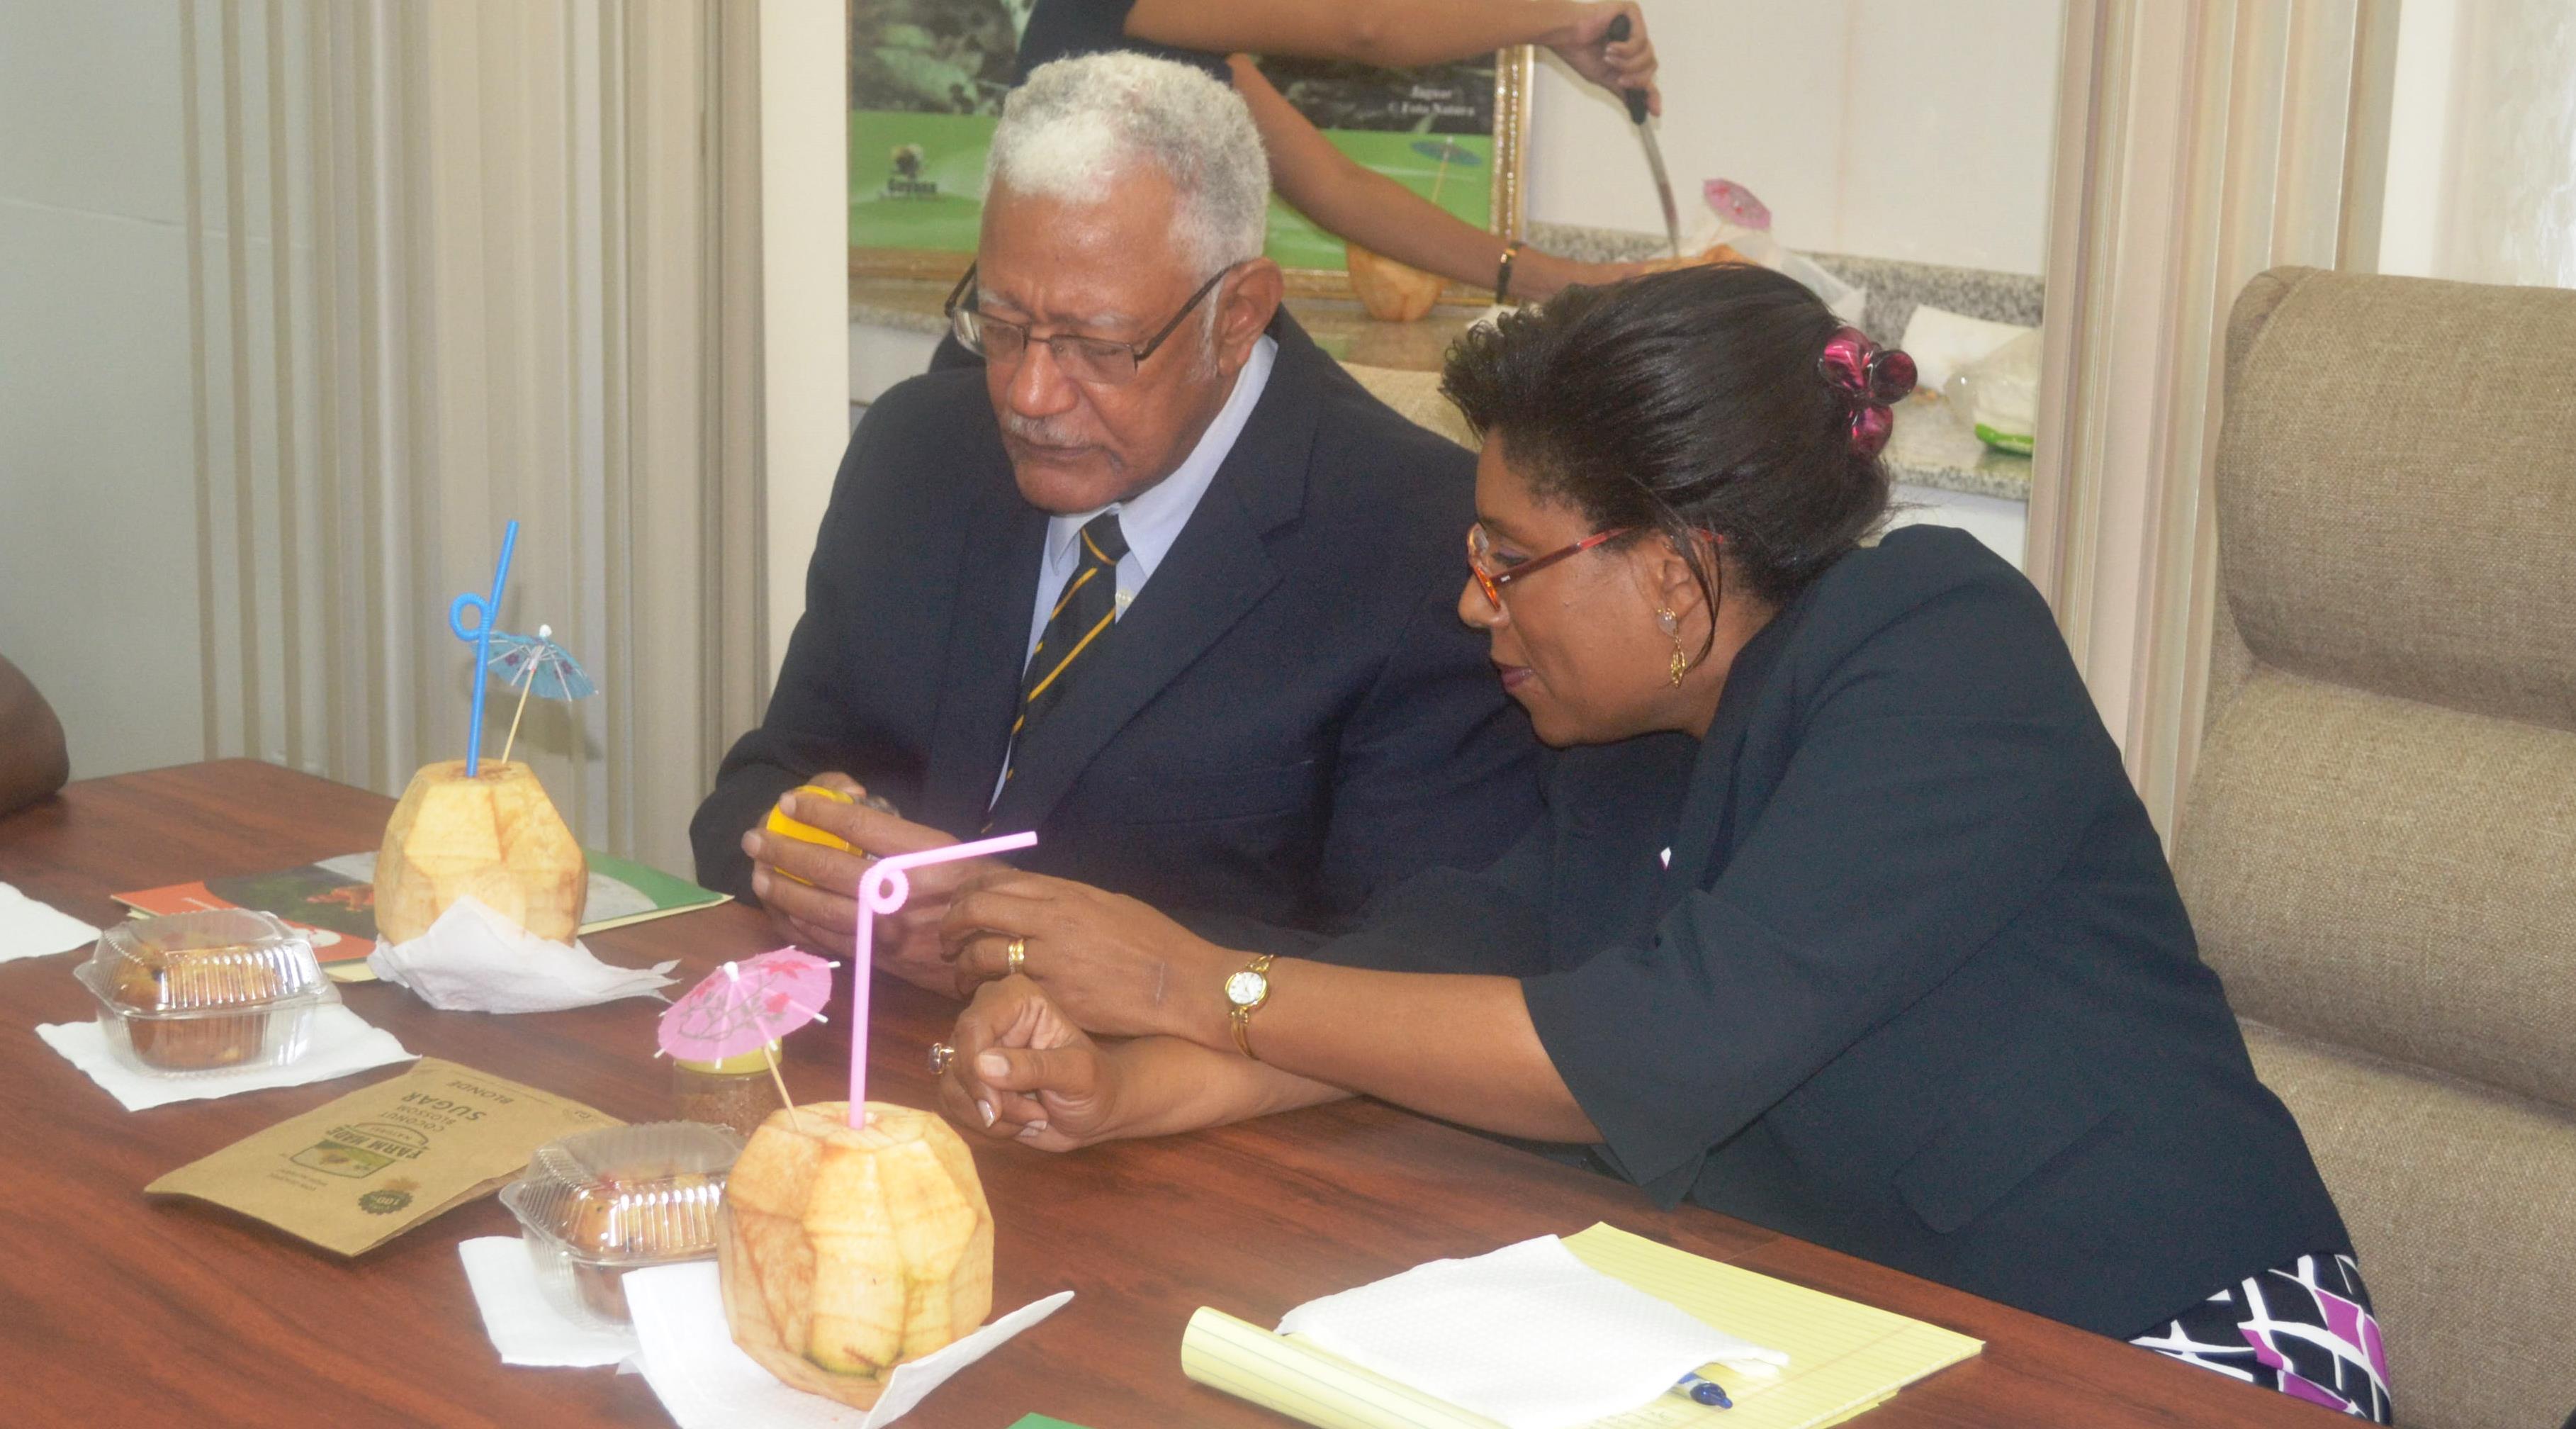 Ministers of Agriculture and Tourism examin some coconut biproducts during the Coconut Festival presentation briefing